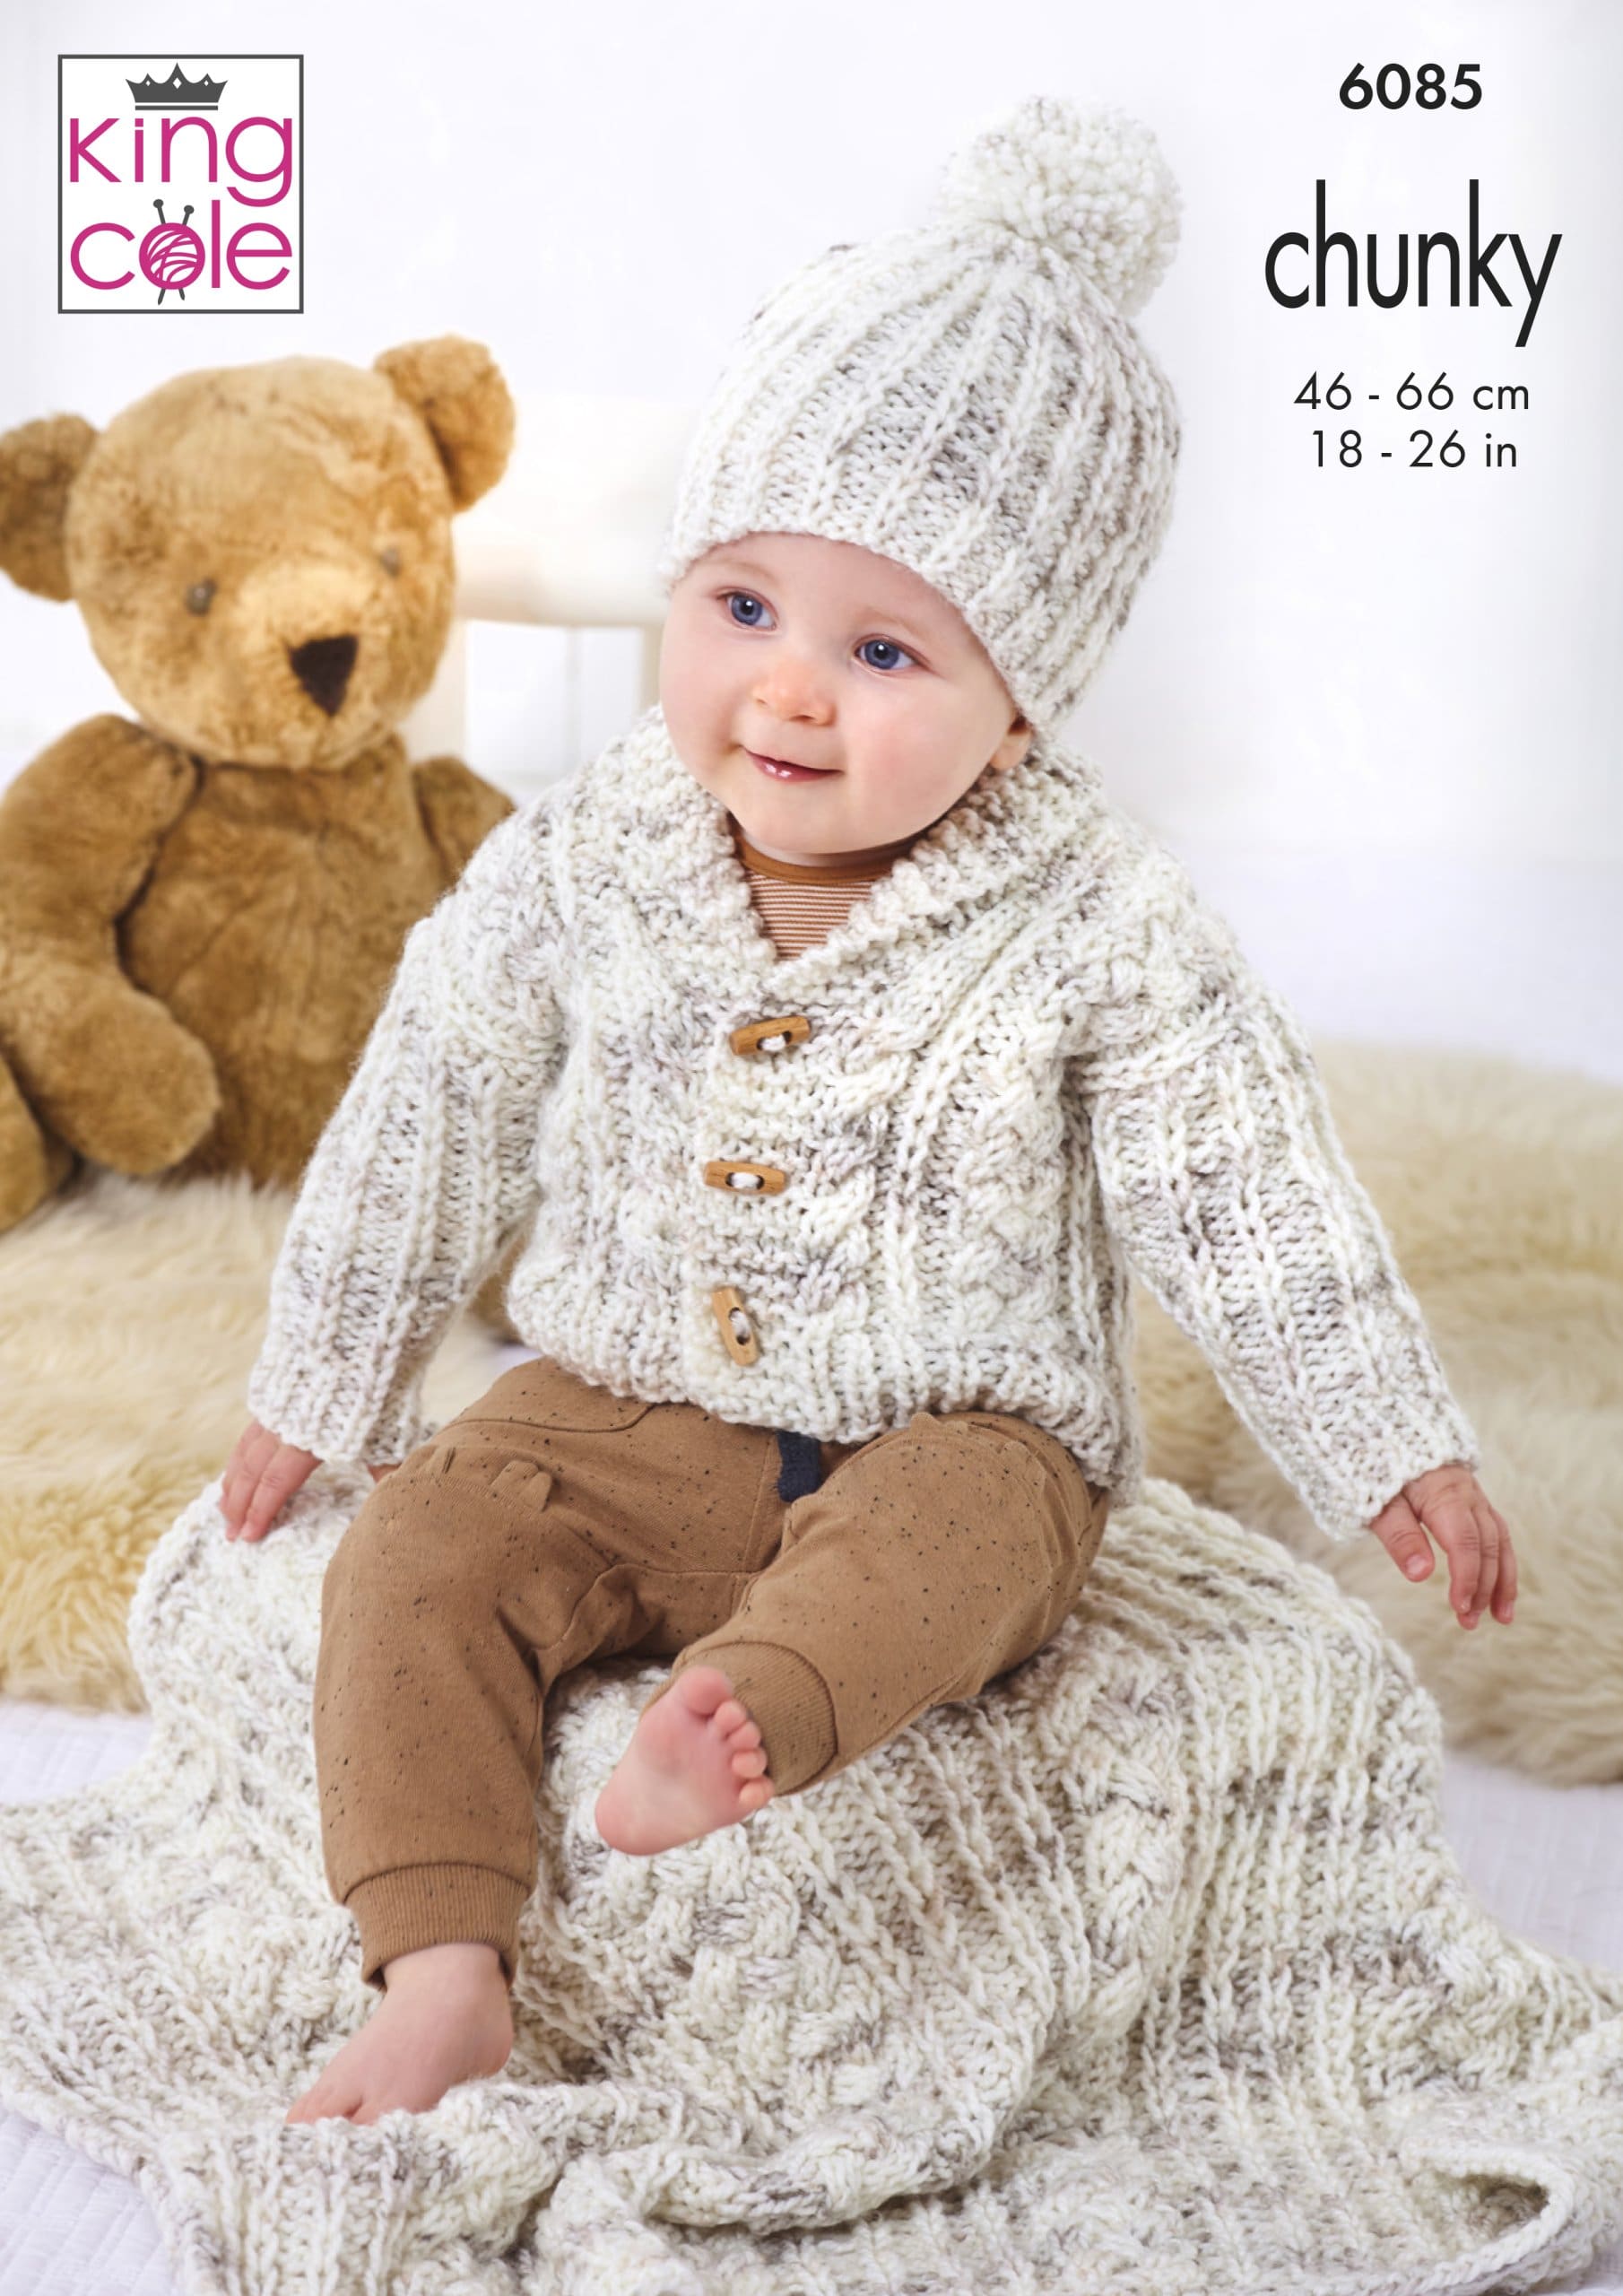 Easy to Follow Jacket, Cardigan, Gilet, Hat & Blanket Knitted in Bumble ...